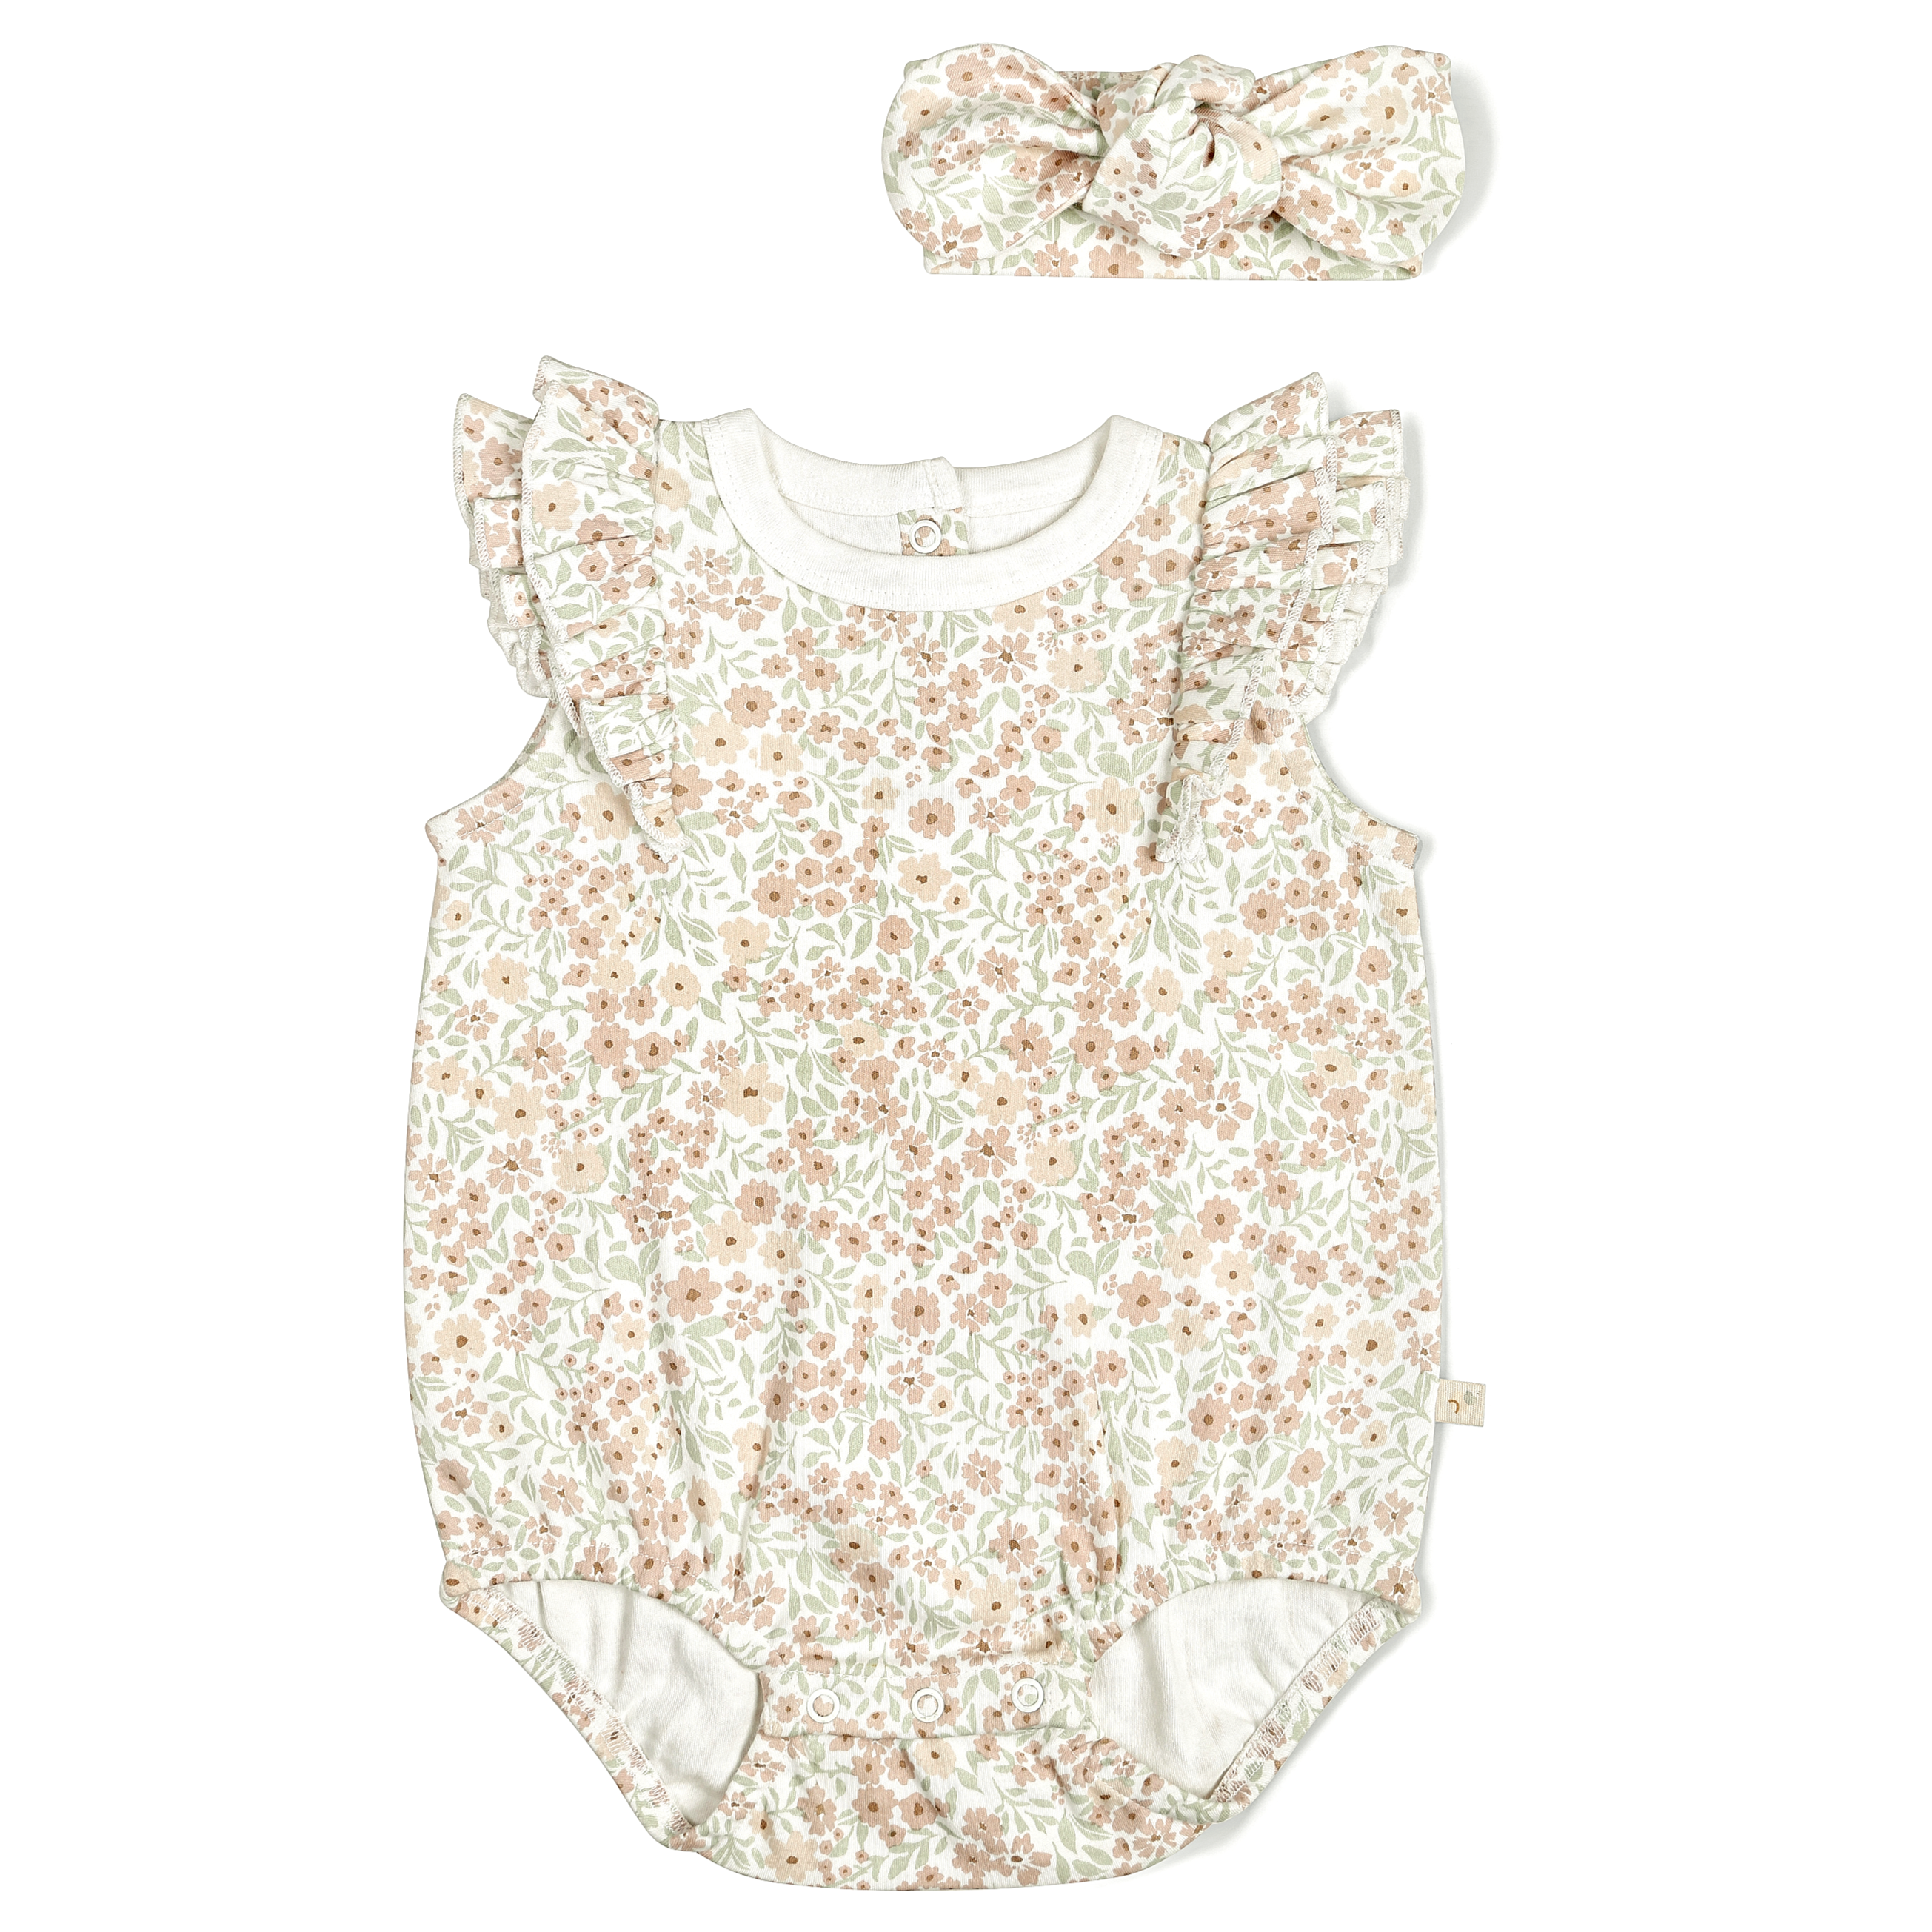 Toddler's Organic Flutter Bubble Onesie in Summer Floral print with ruffle trim, accompanied by a matching bow headband, displayed on a white background. (Brand: Makemake Organics)